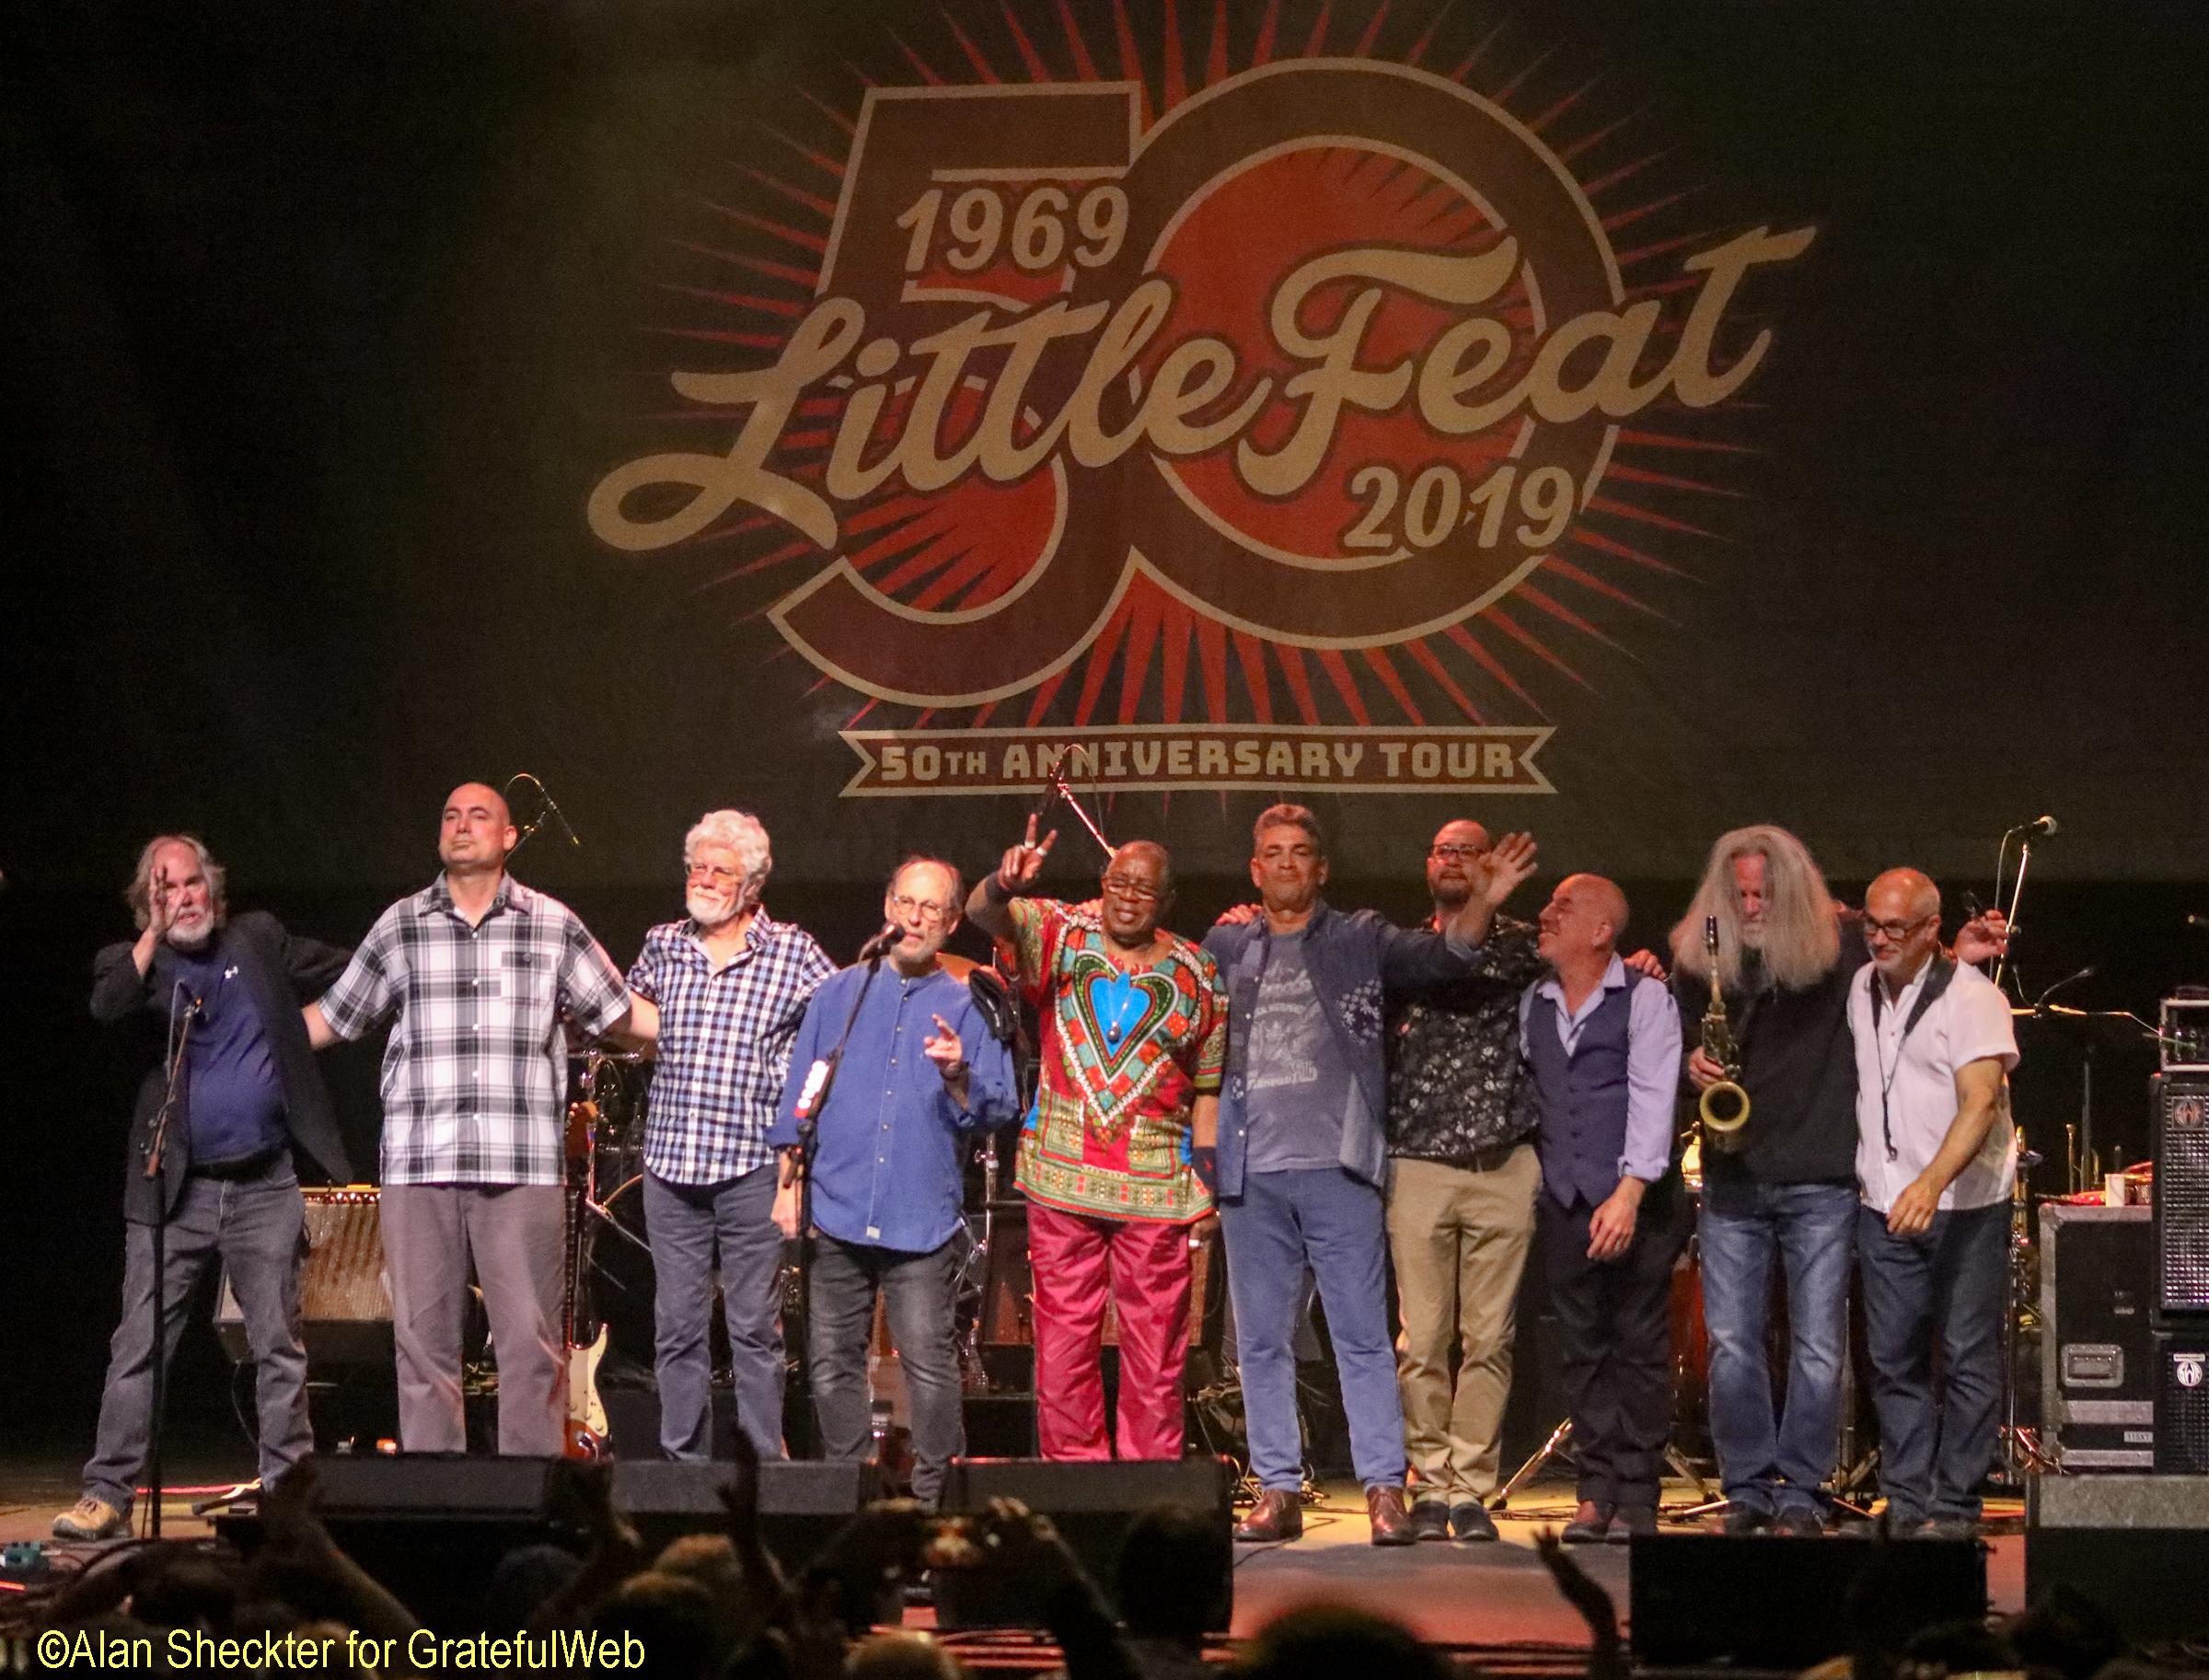 Little Feat 2019 with Paul Barrere | Photo by Alan Sheckter